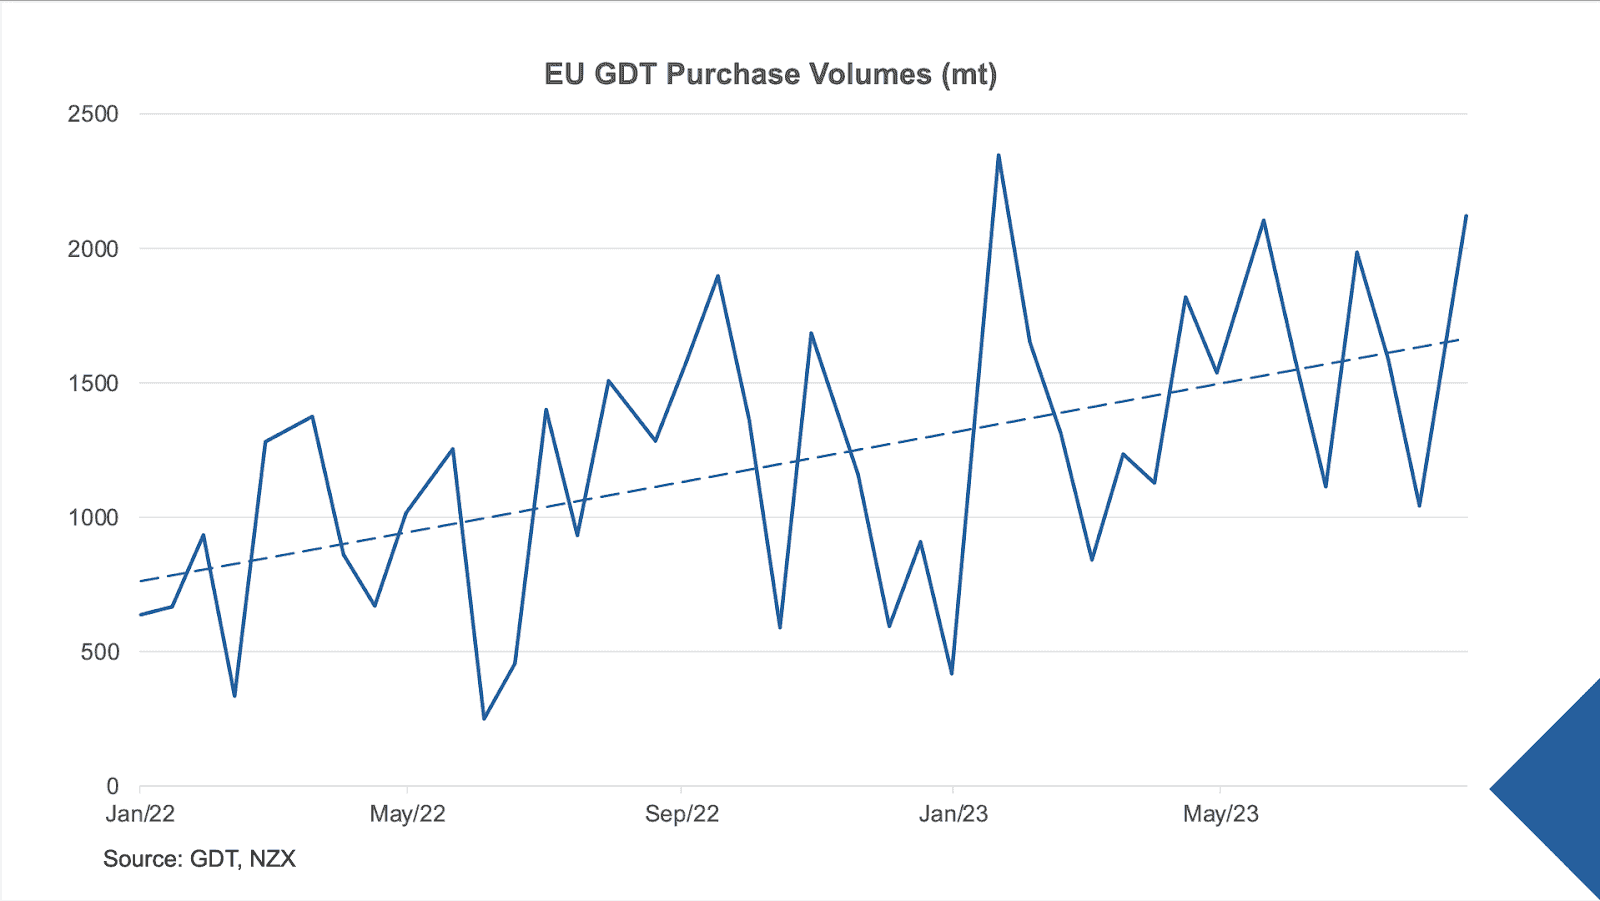 EU GDT Purchase Volumes